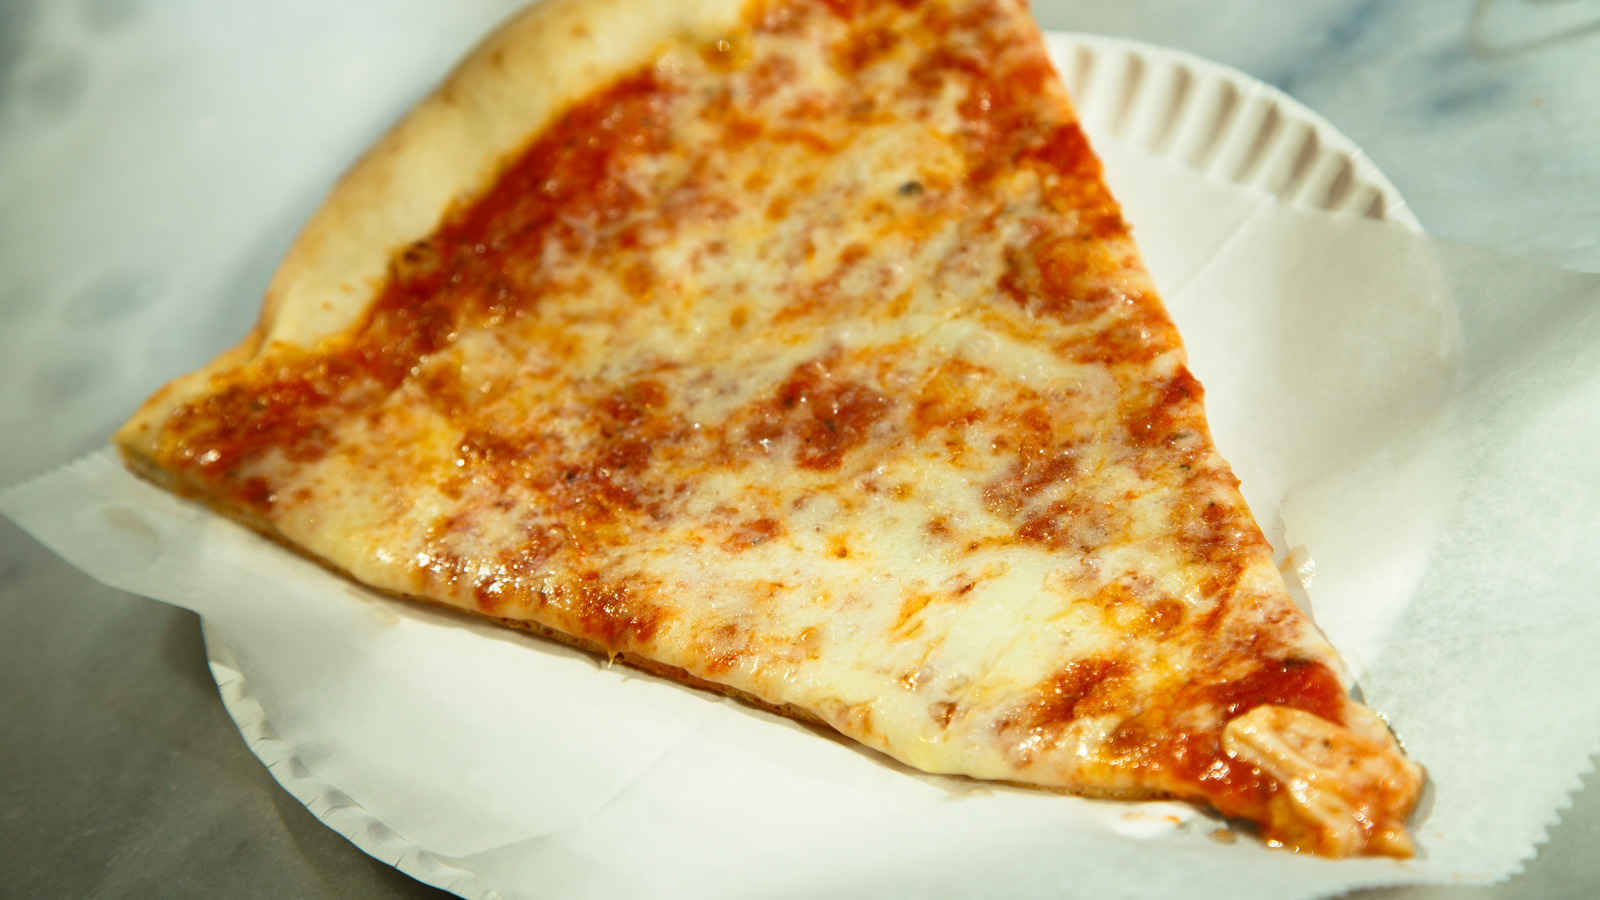 Joe and Pats: A Slice of New York Tradition